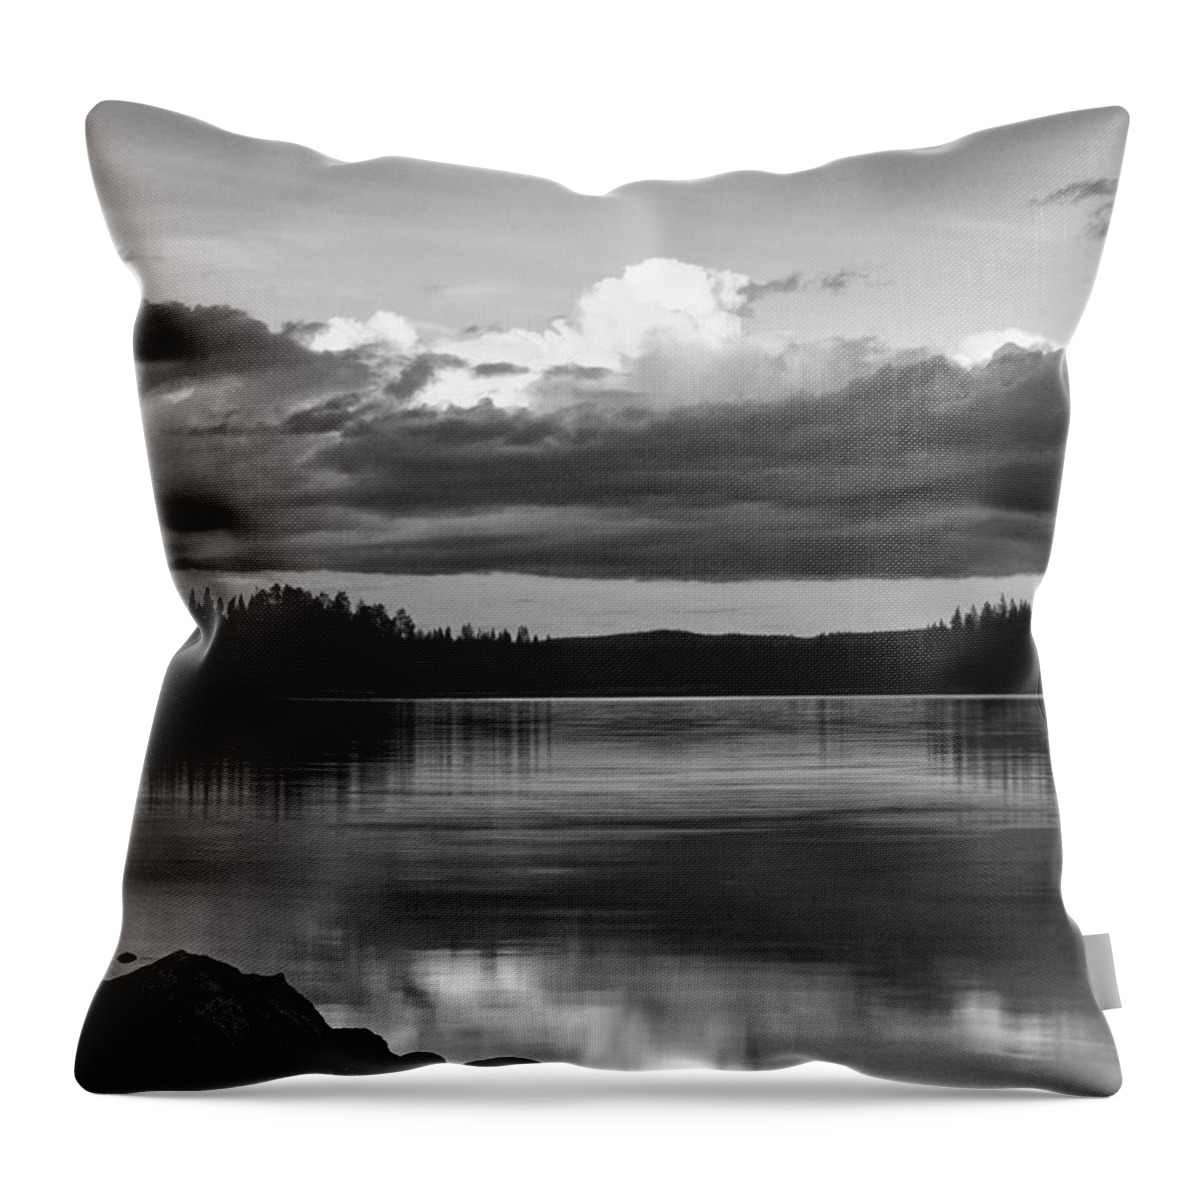 Scenics Throw Pillow featuring the photograph Black And White Lake Reflection by Heikki Salmi